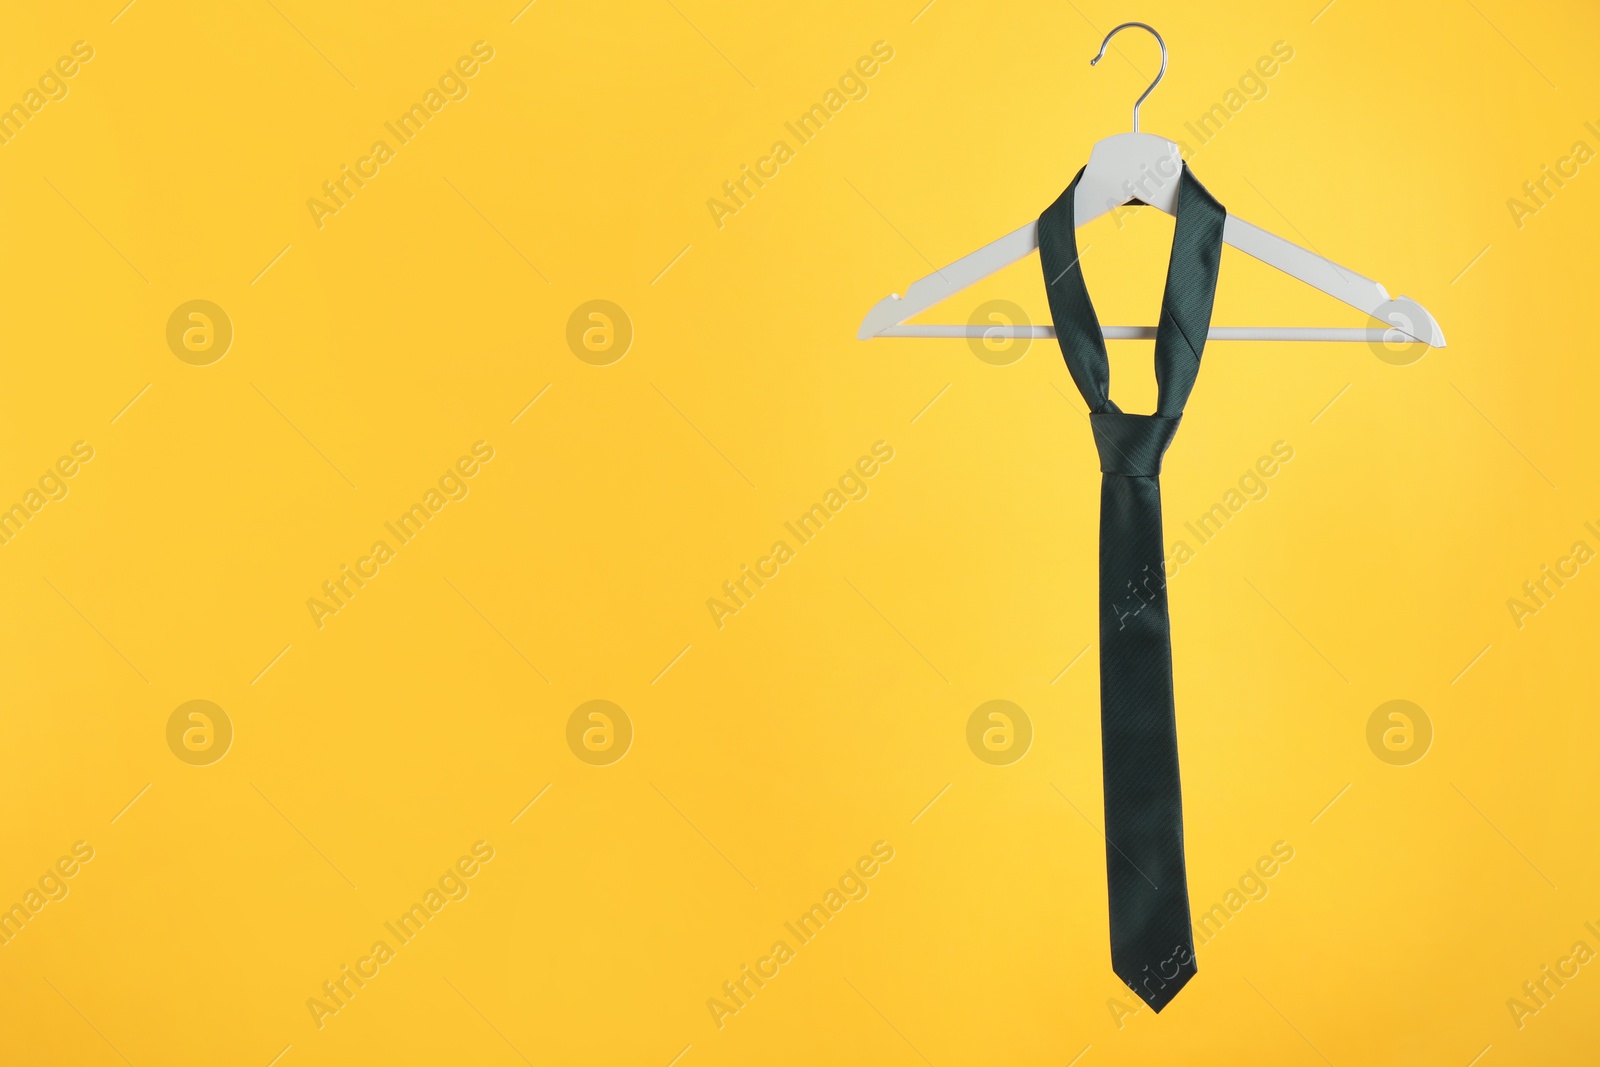 Photo of Hanger with black tie against orange background. Space for text